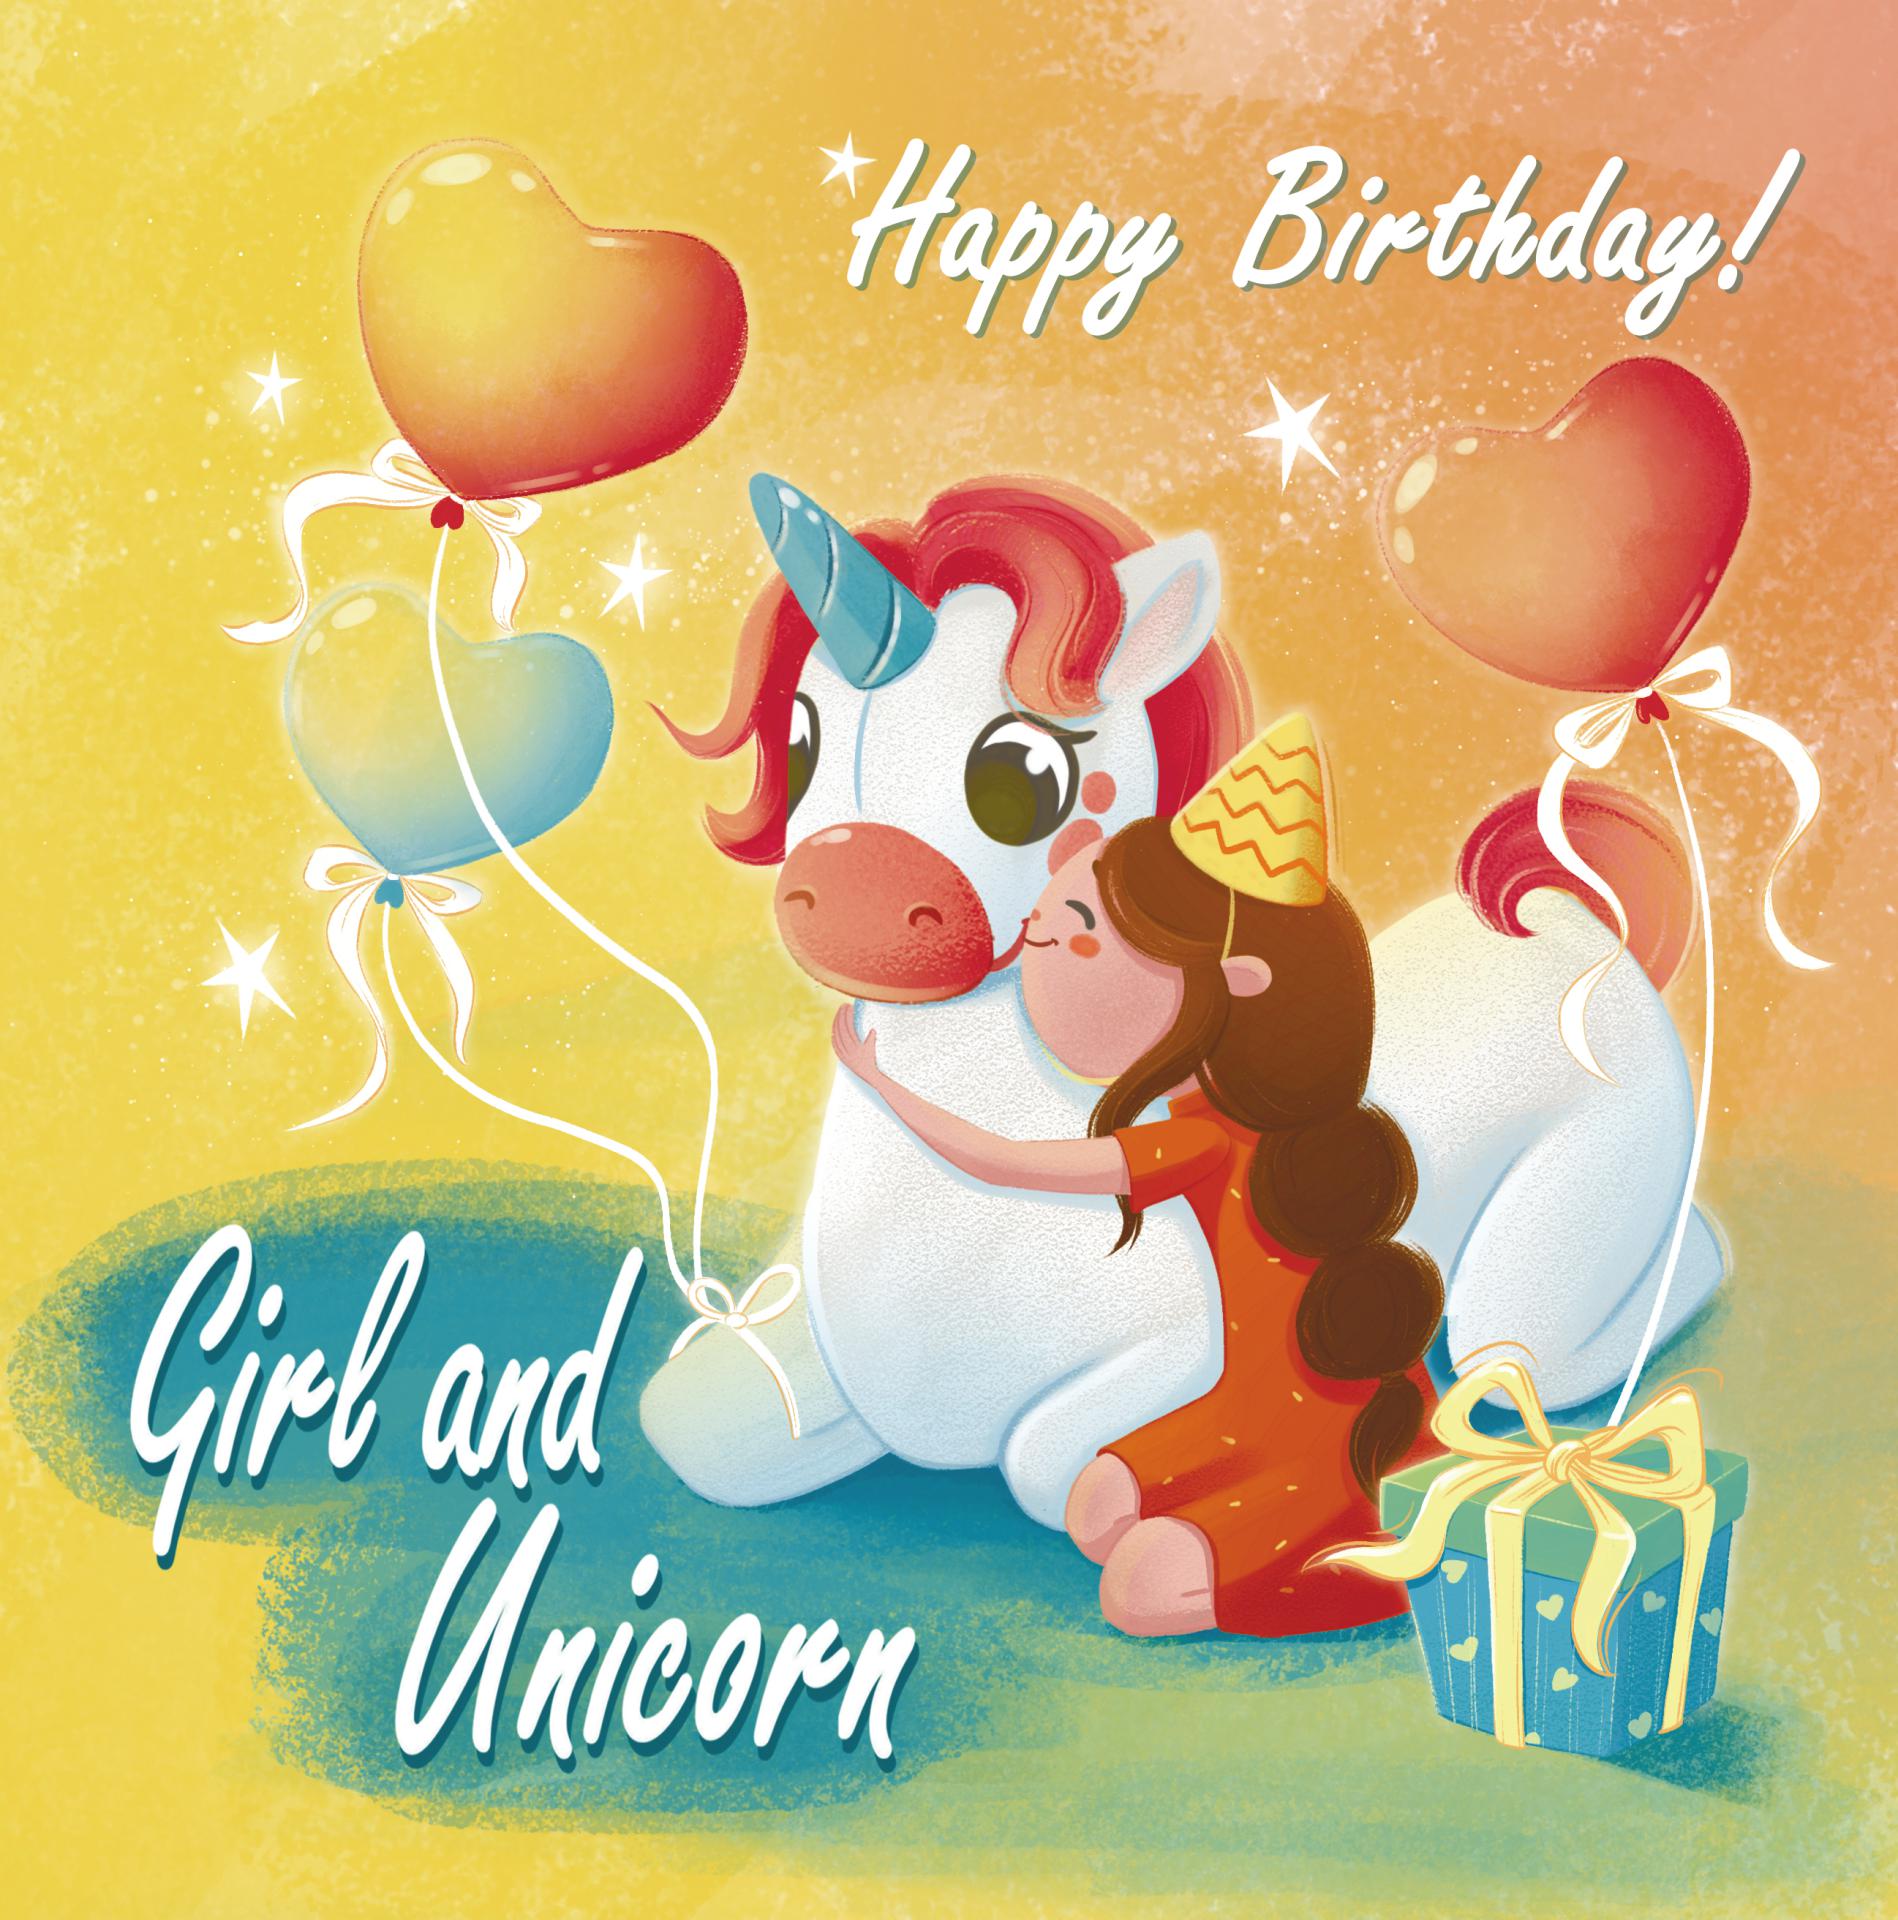 FREE: Girl and Unicorn – Happy Birthday: Unicorn baby picture book for girls age 4-8 with gorgeous pictured and coloring pages by Alex Fabler